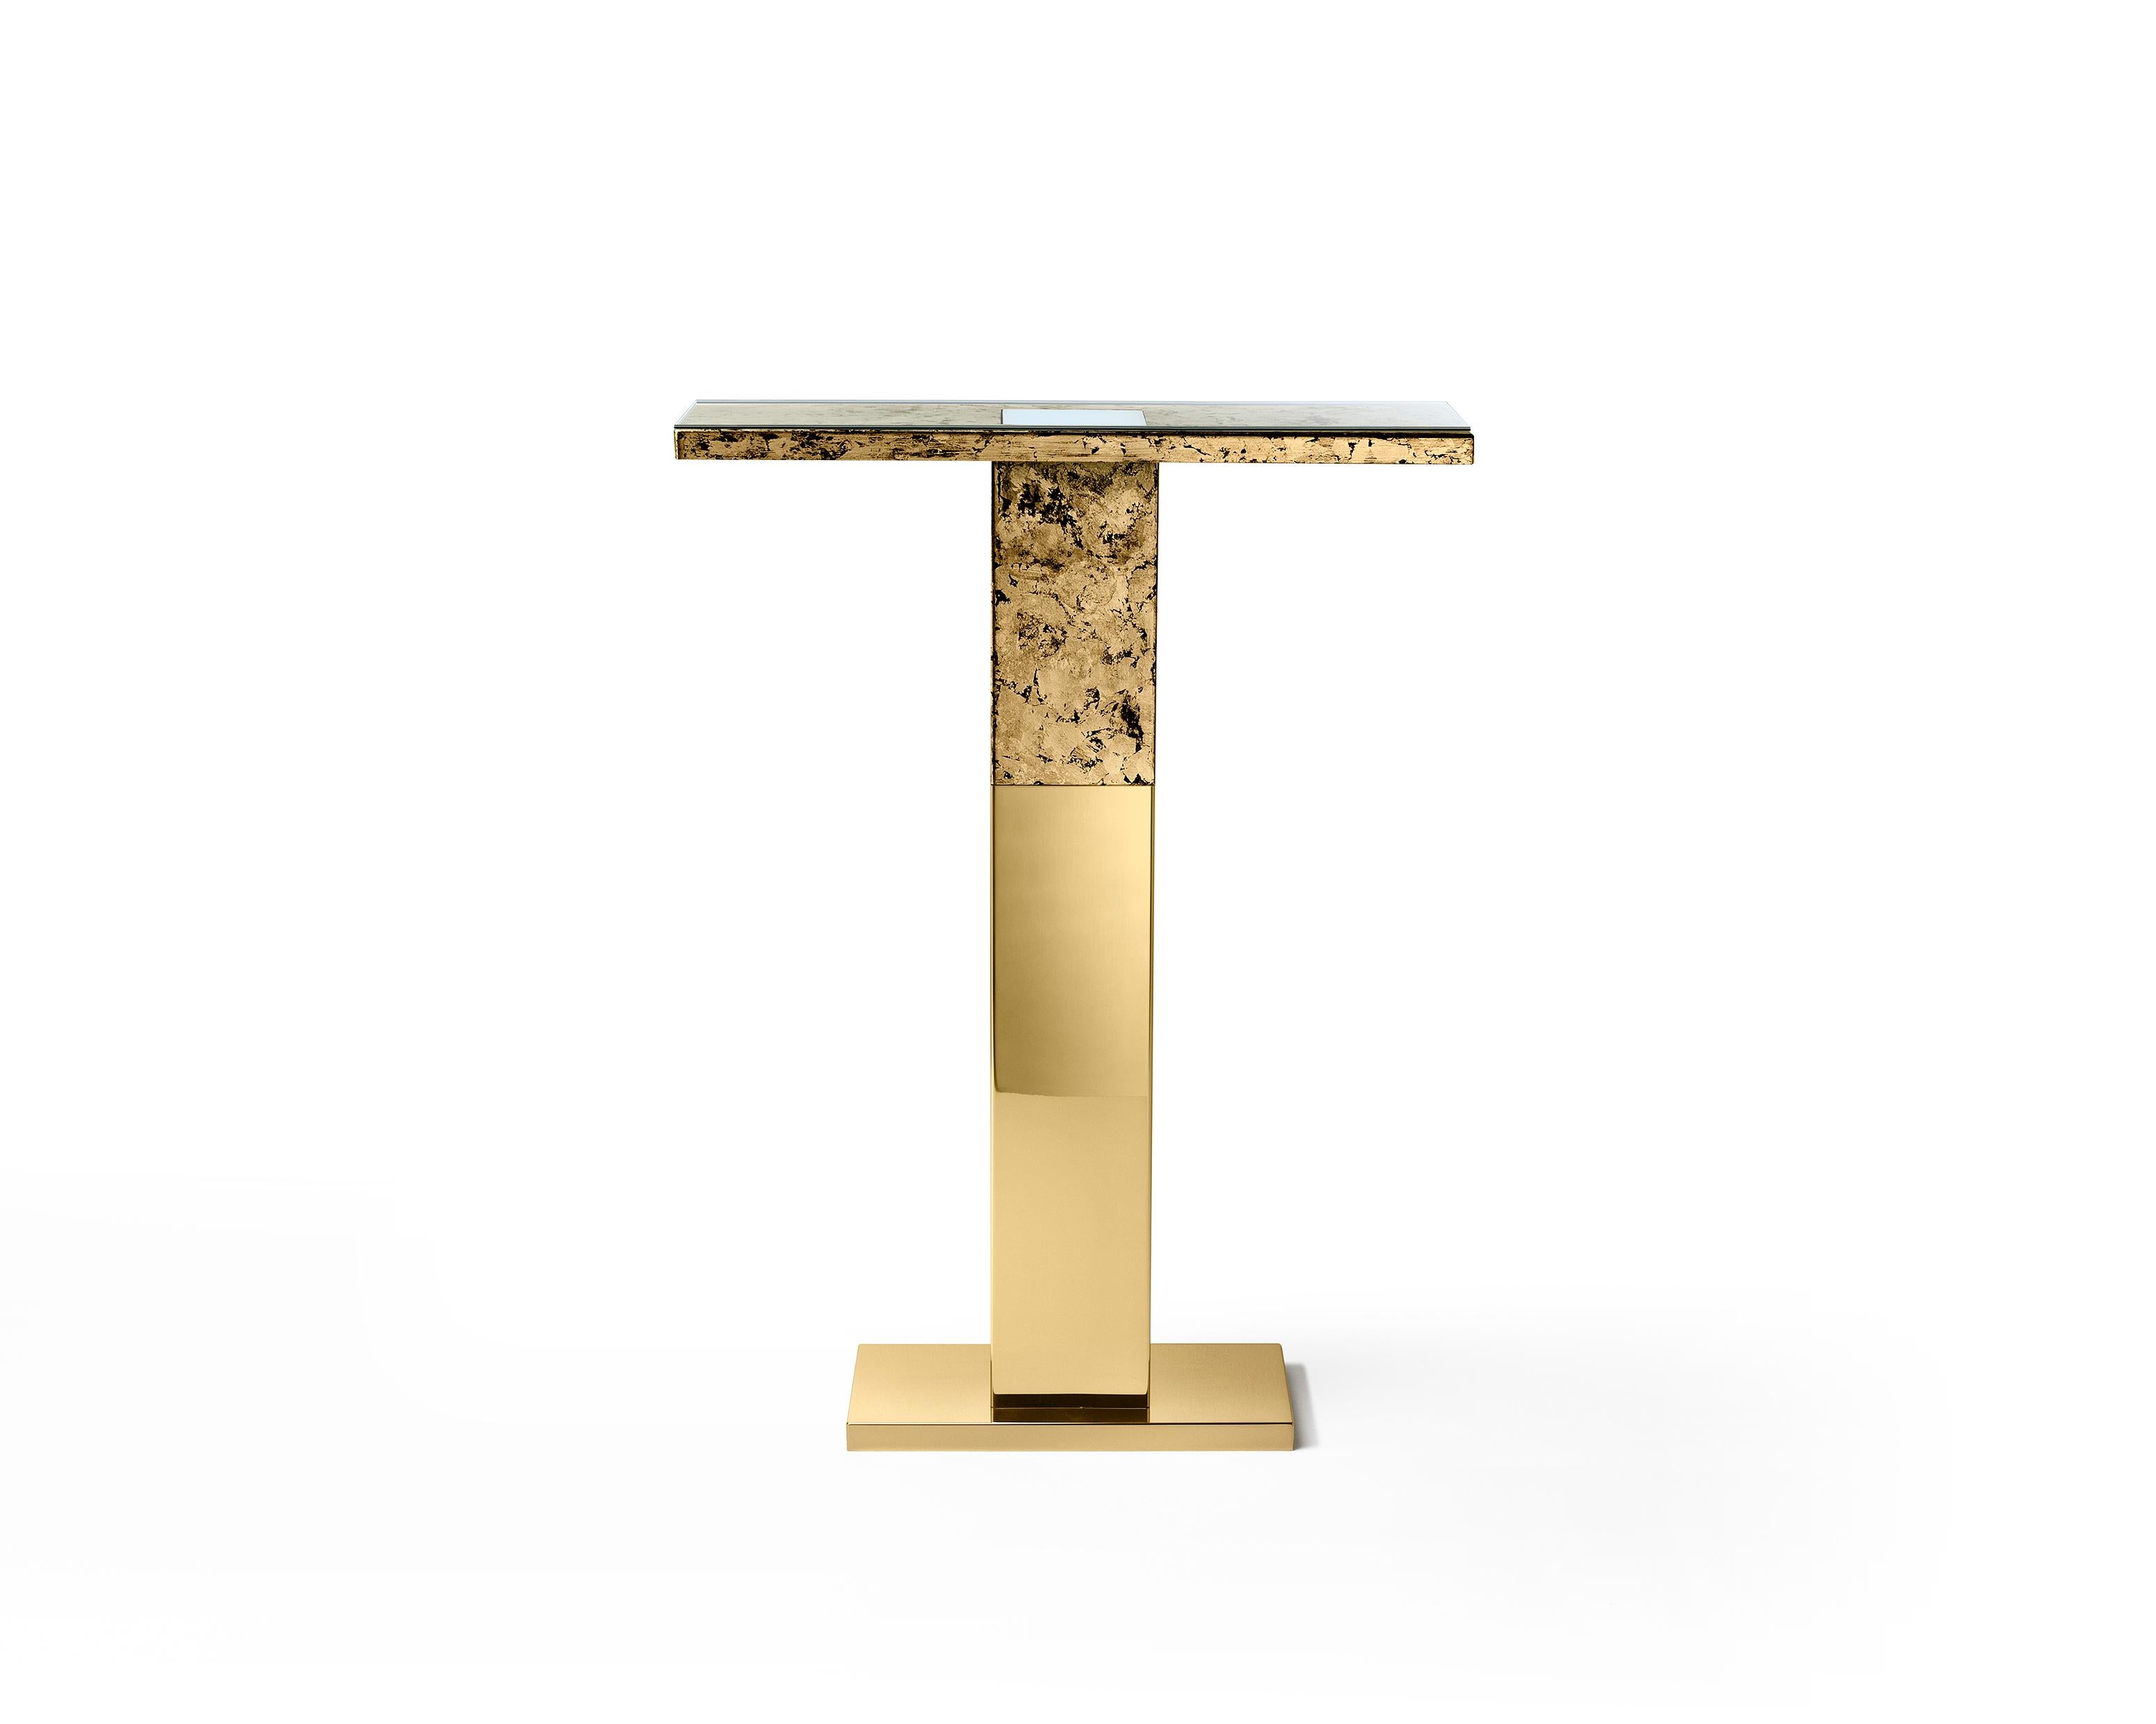 Console in stainless steel, handmade finish. Backlit Console: holds vases, books, sculptures.

Materials:
24k Gold plated stainless steel and acid etching.